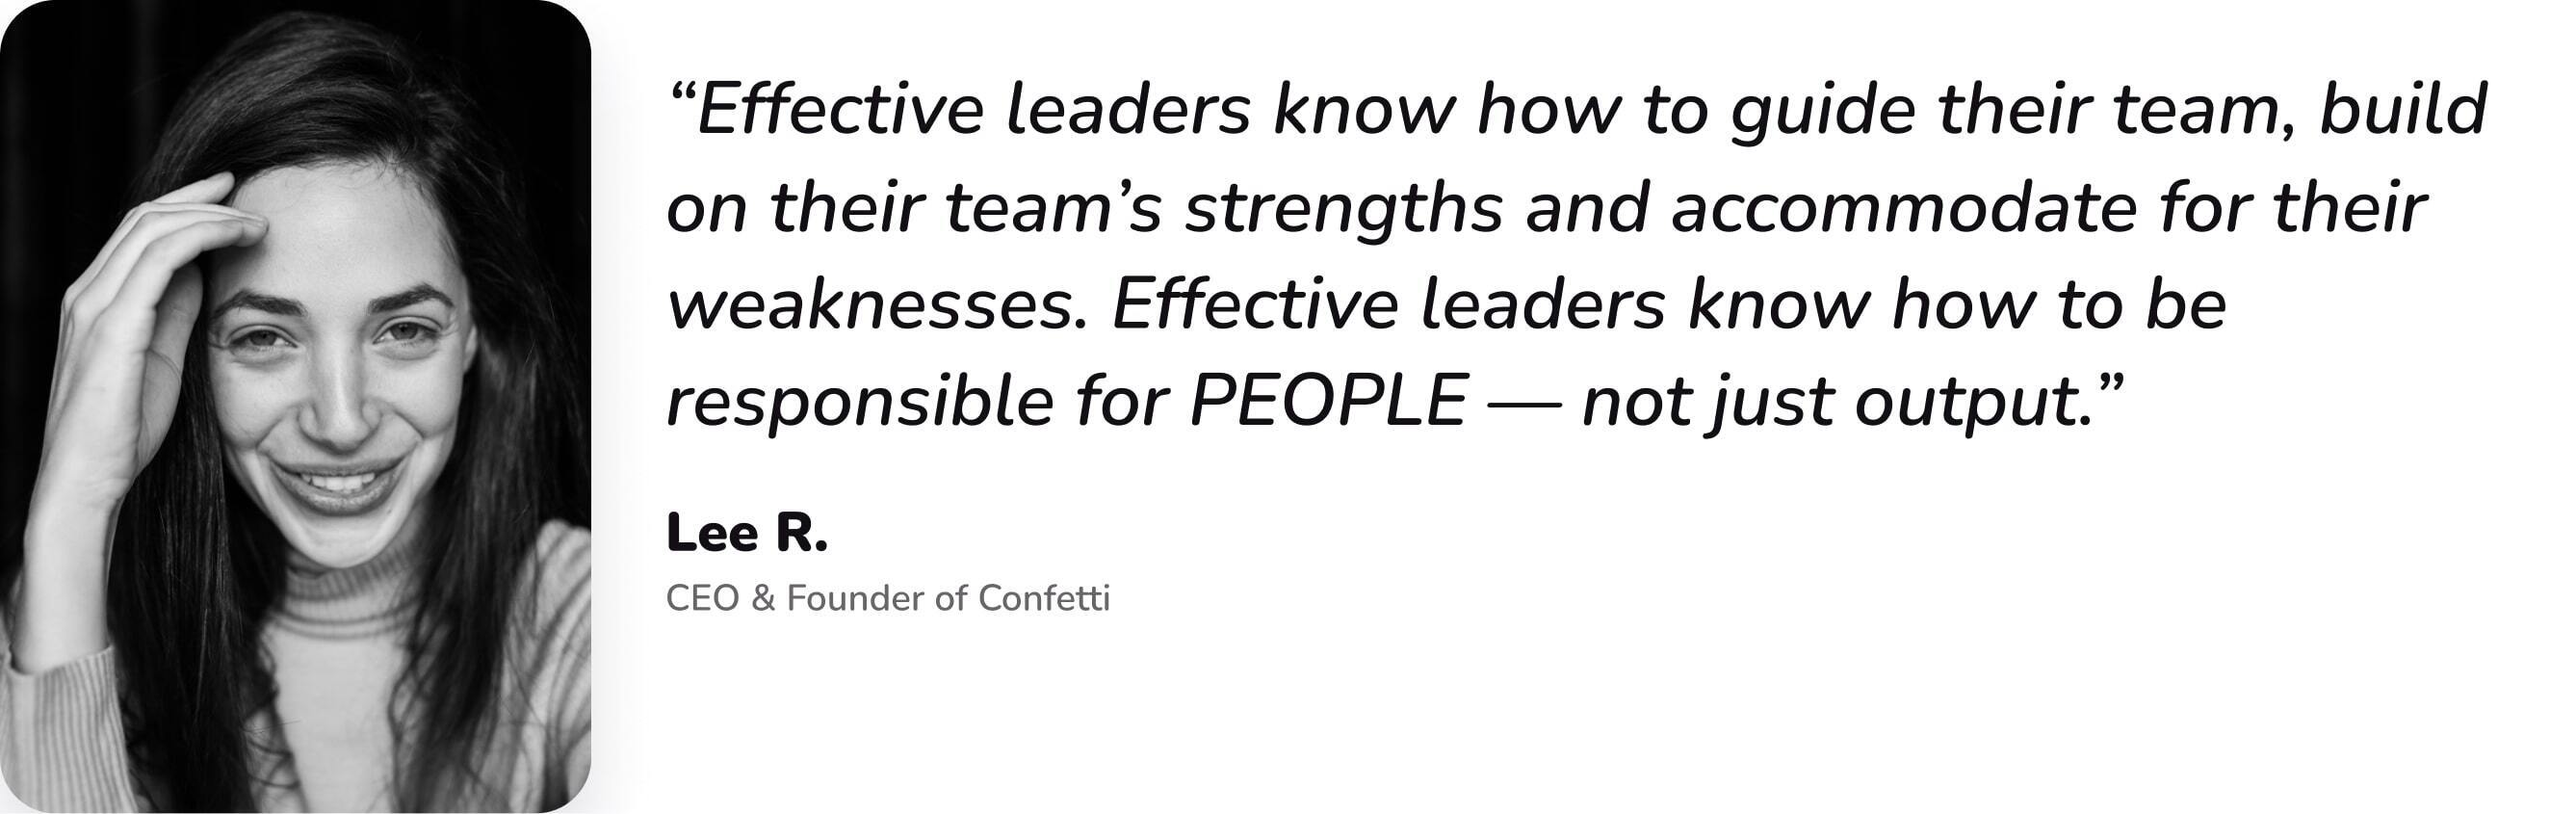 Quote from CEO & Founder of Confetti on effective leaders